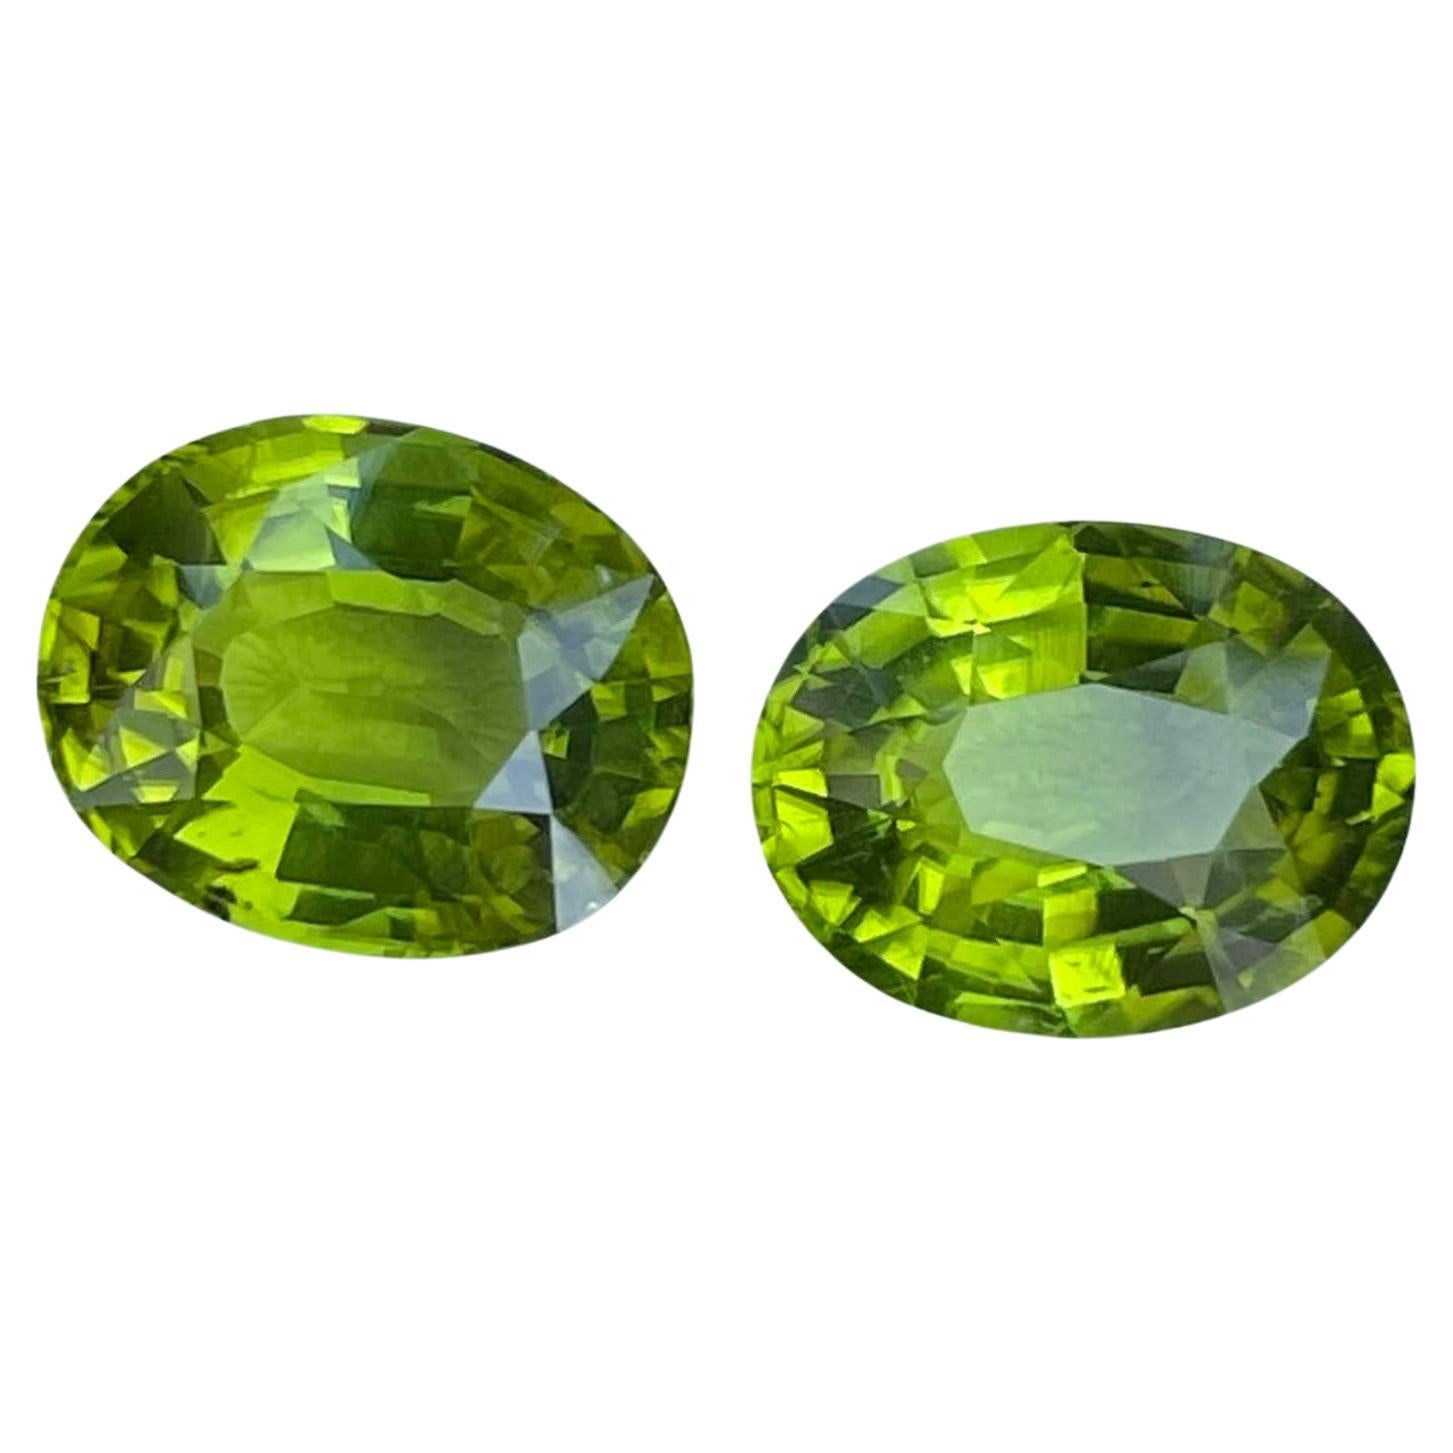 8.20 carats Green Loose Peridot Pair Fancy Oval Cut Natural Pakistani Gemstone For Sale